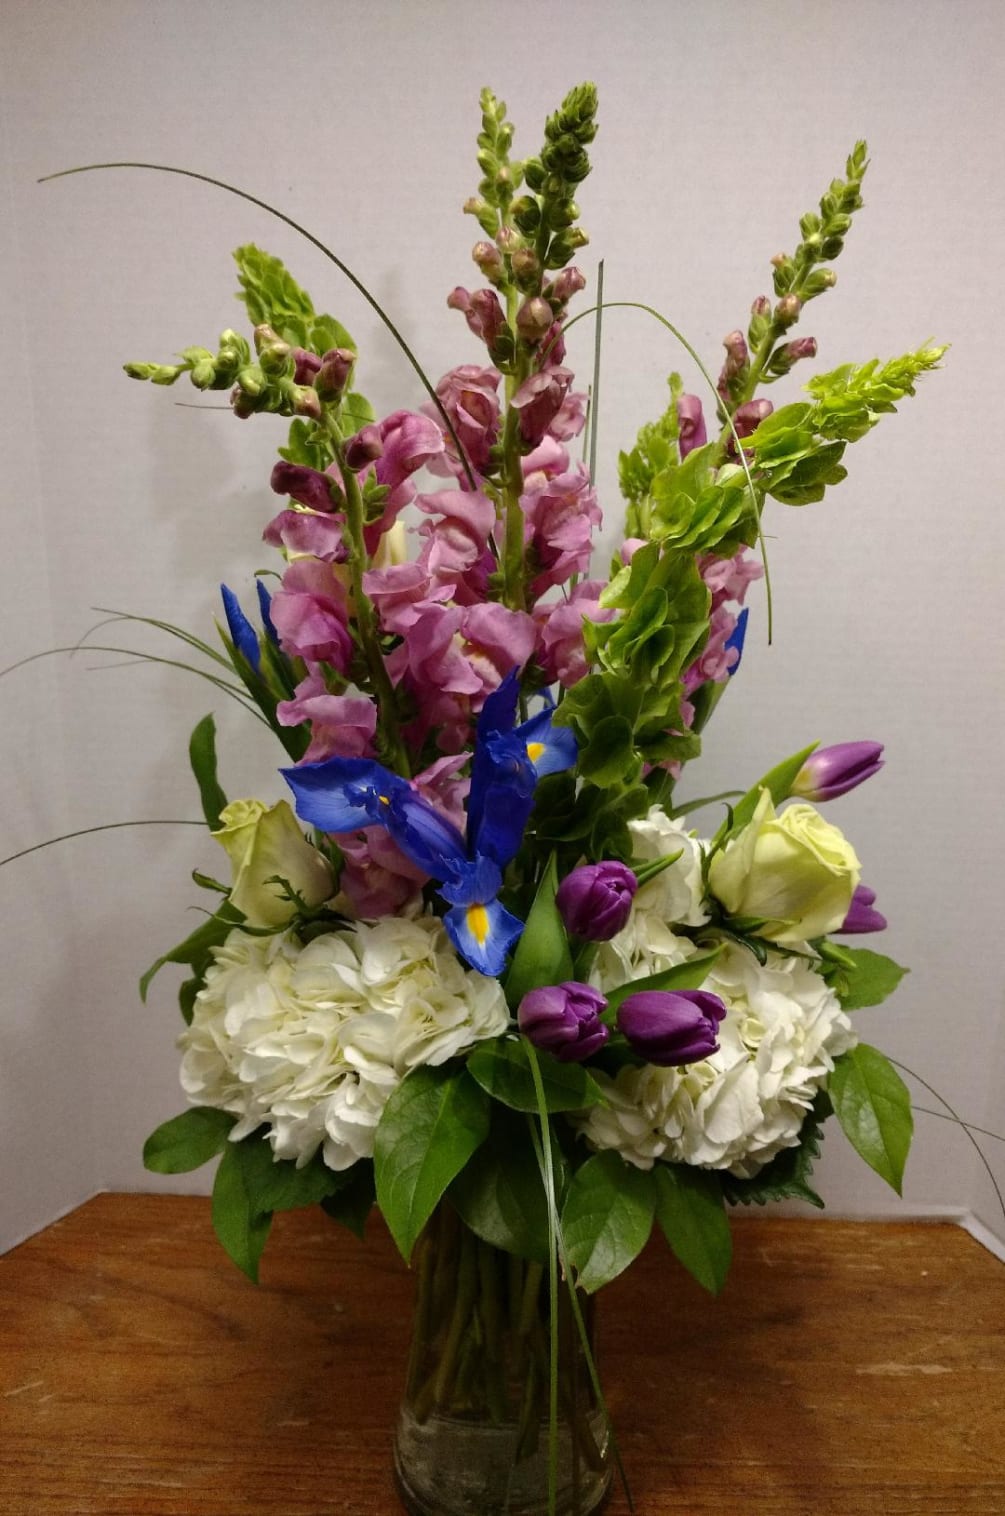 Add some tranquility to your life with this assortment of Snapdragons, Bells